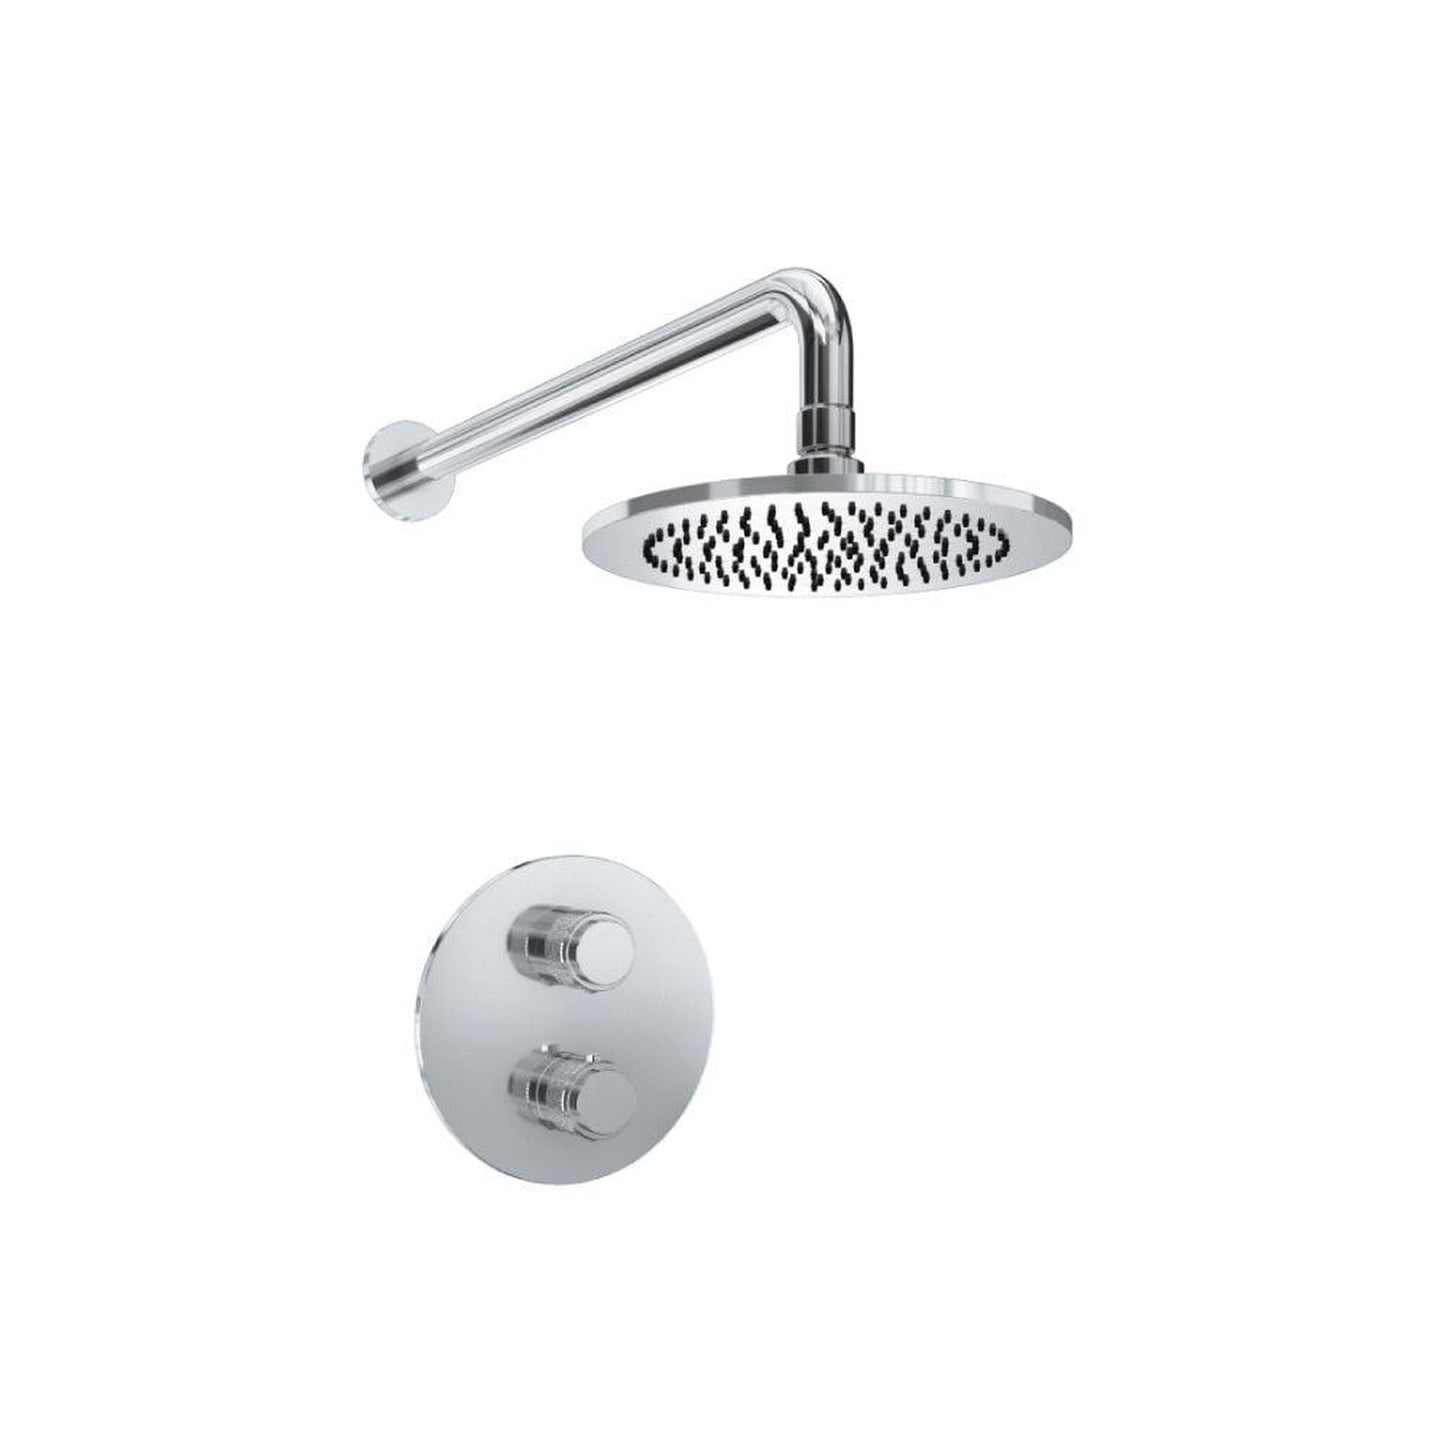 Isenberg Serie 250 Single Output Chrome Wall-Mounted Shower Set With Single Function Round Rain Shower Head, Two-Handle Shower Trim and 1-Output Wall-Mounted Thermostatic Shower Valve With Integrated Volume Control